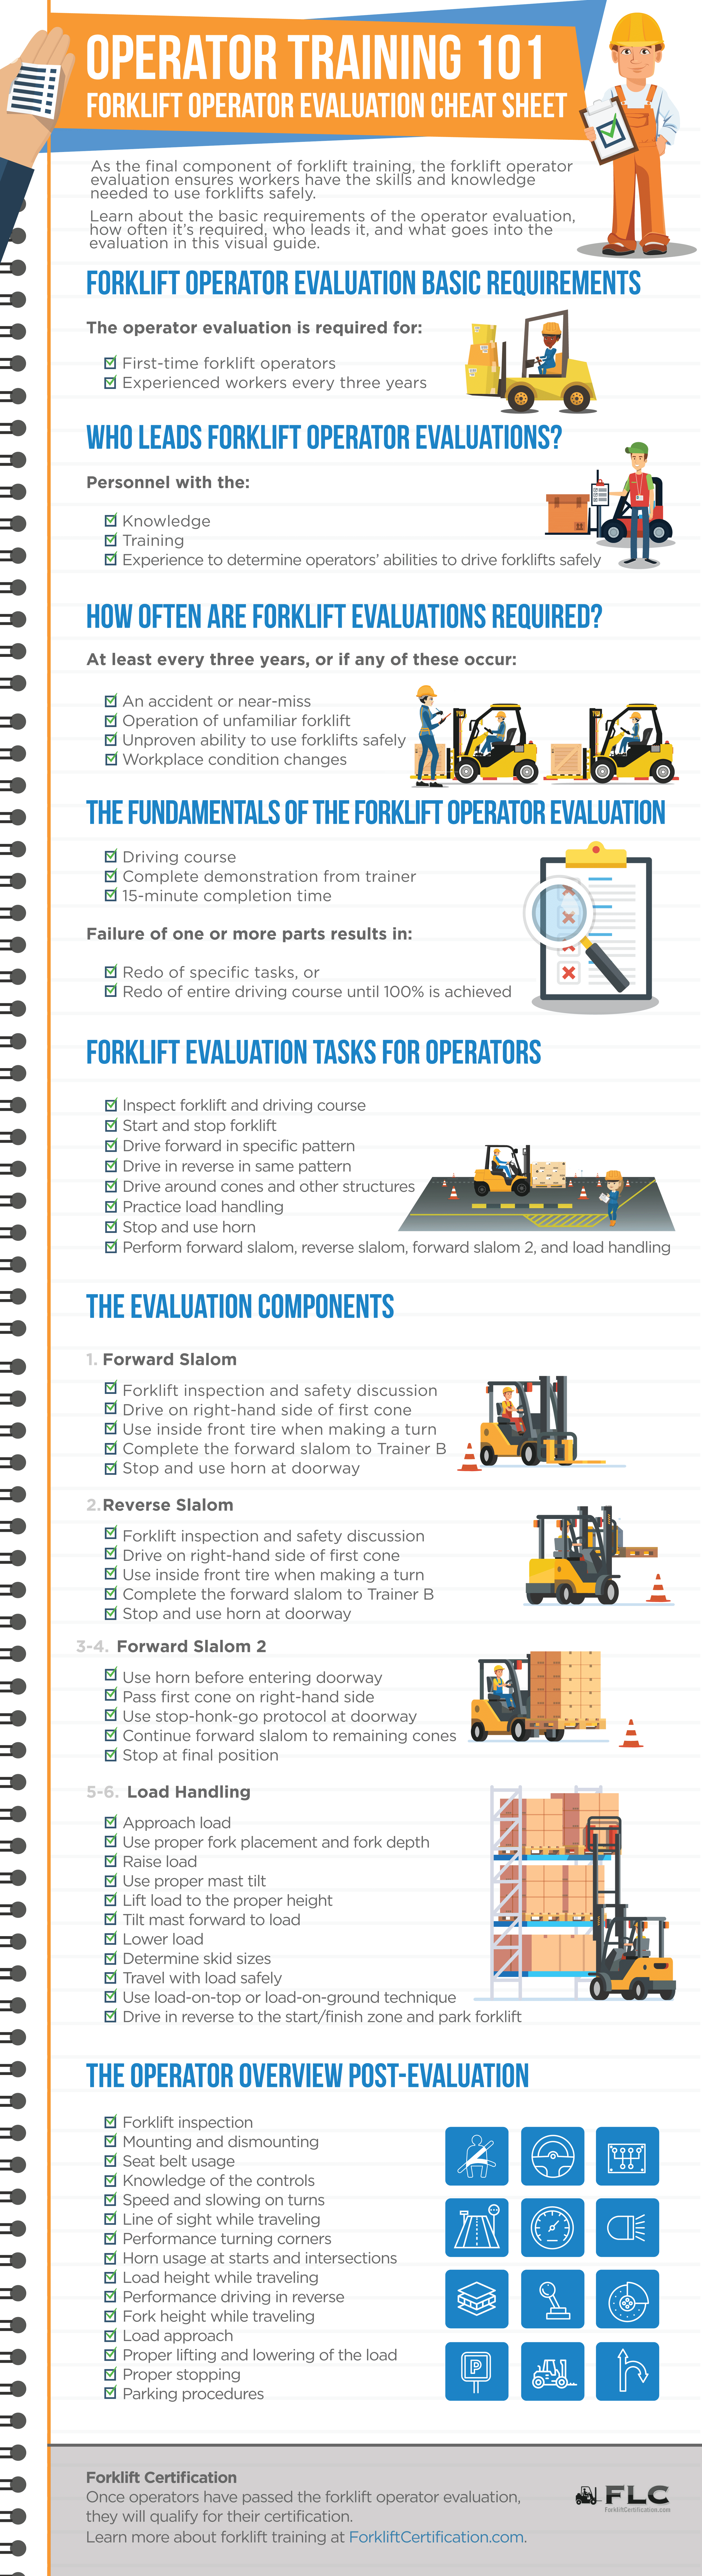 The Flc Guide To The Forklift Driver Evaluation Form